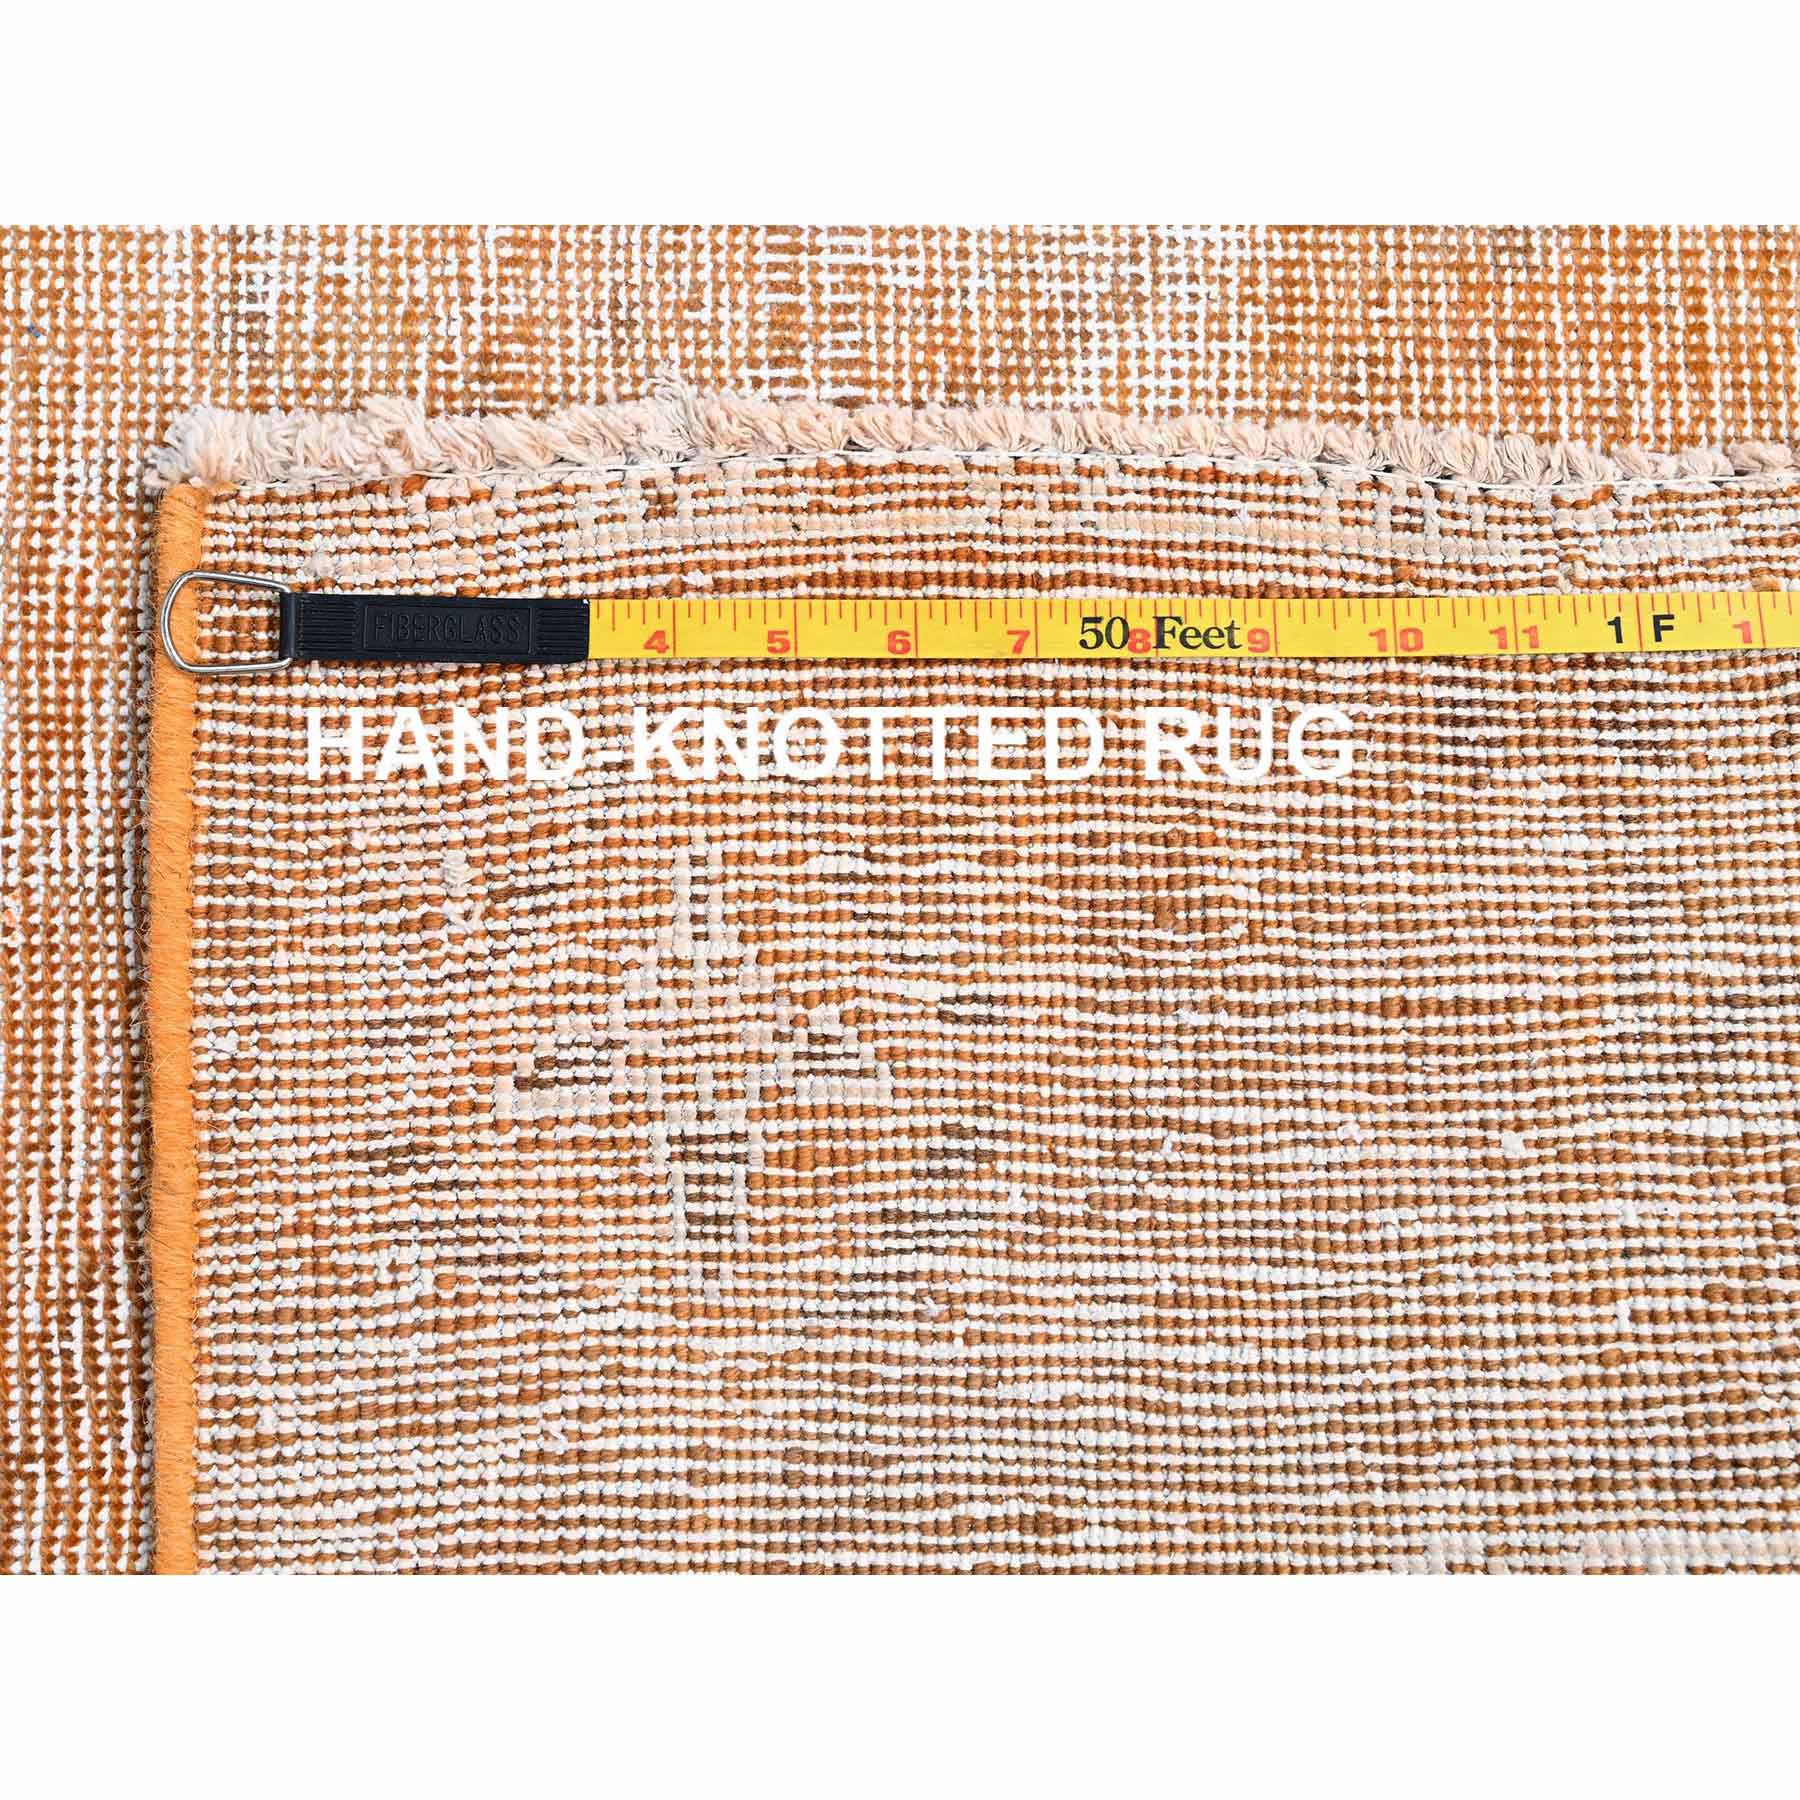 Overdyed-Vintage-Hand-Knotted-Rug-430460